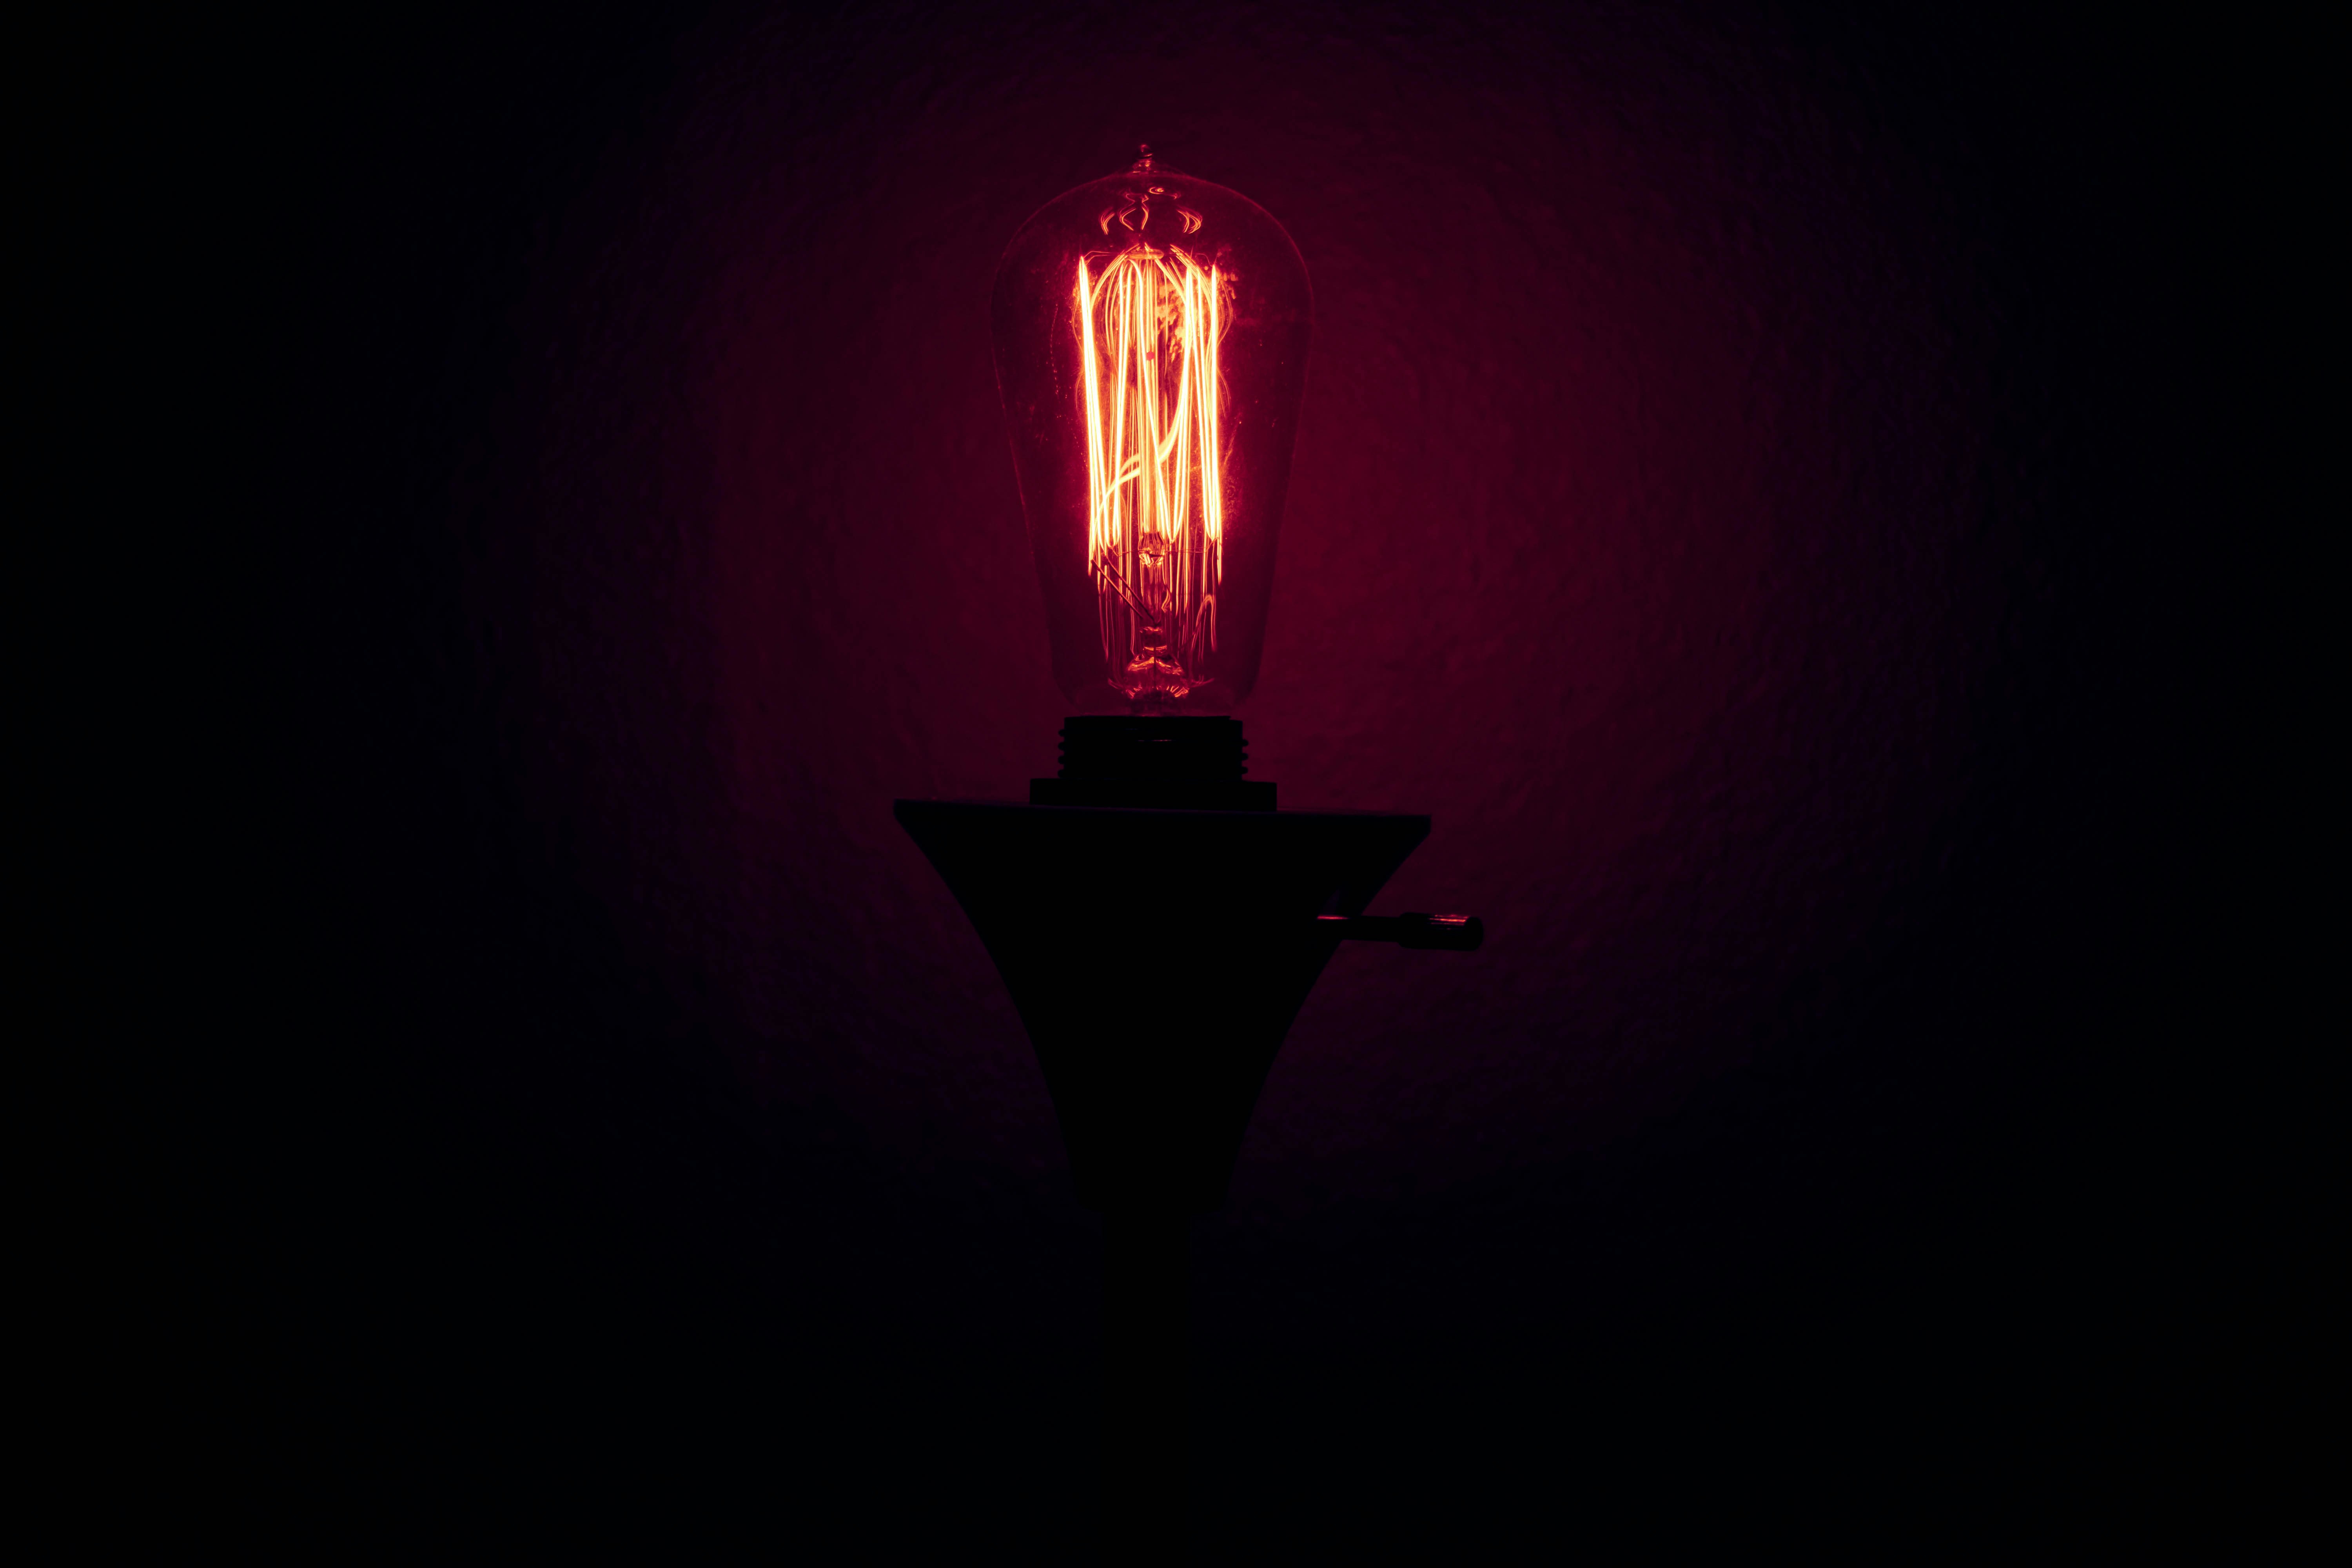 I wanted to achieve a light being surrounded by impending darkness that shines brightly, in a hopeless situation. This lamp in my apartment seemed perfect. I took the picture with all the lights off with the lamp on and in the editing process took down the highlights and added some color.